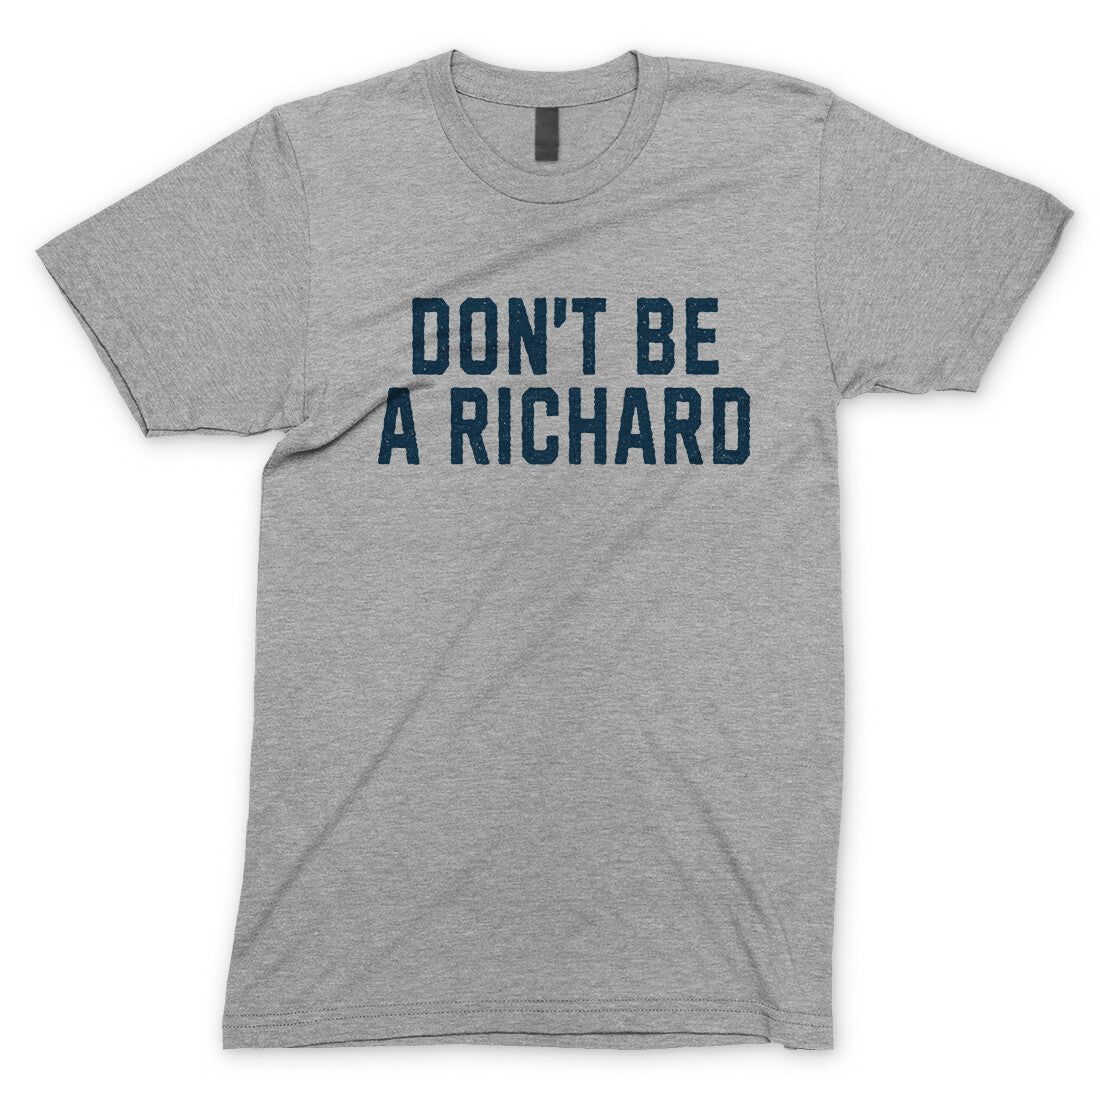 Don't Be a Richard in Sport Grey Color